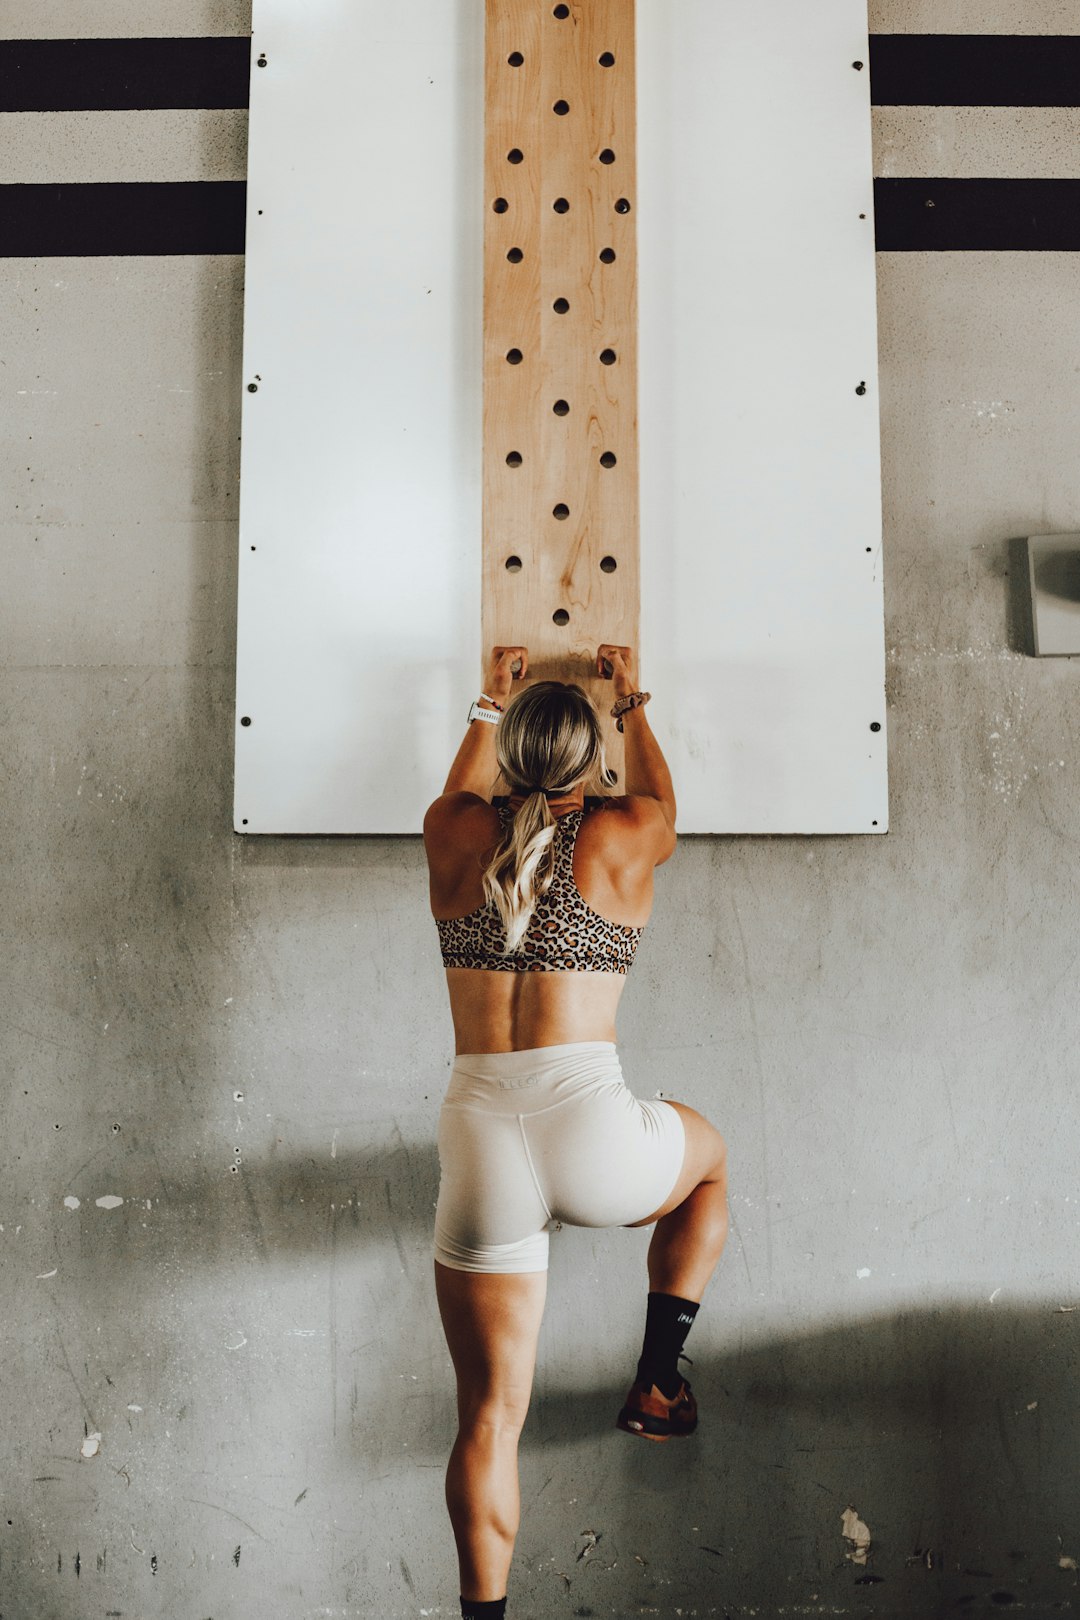 Girl working out on peg board in CrossFit gym